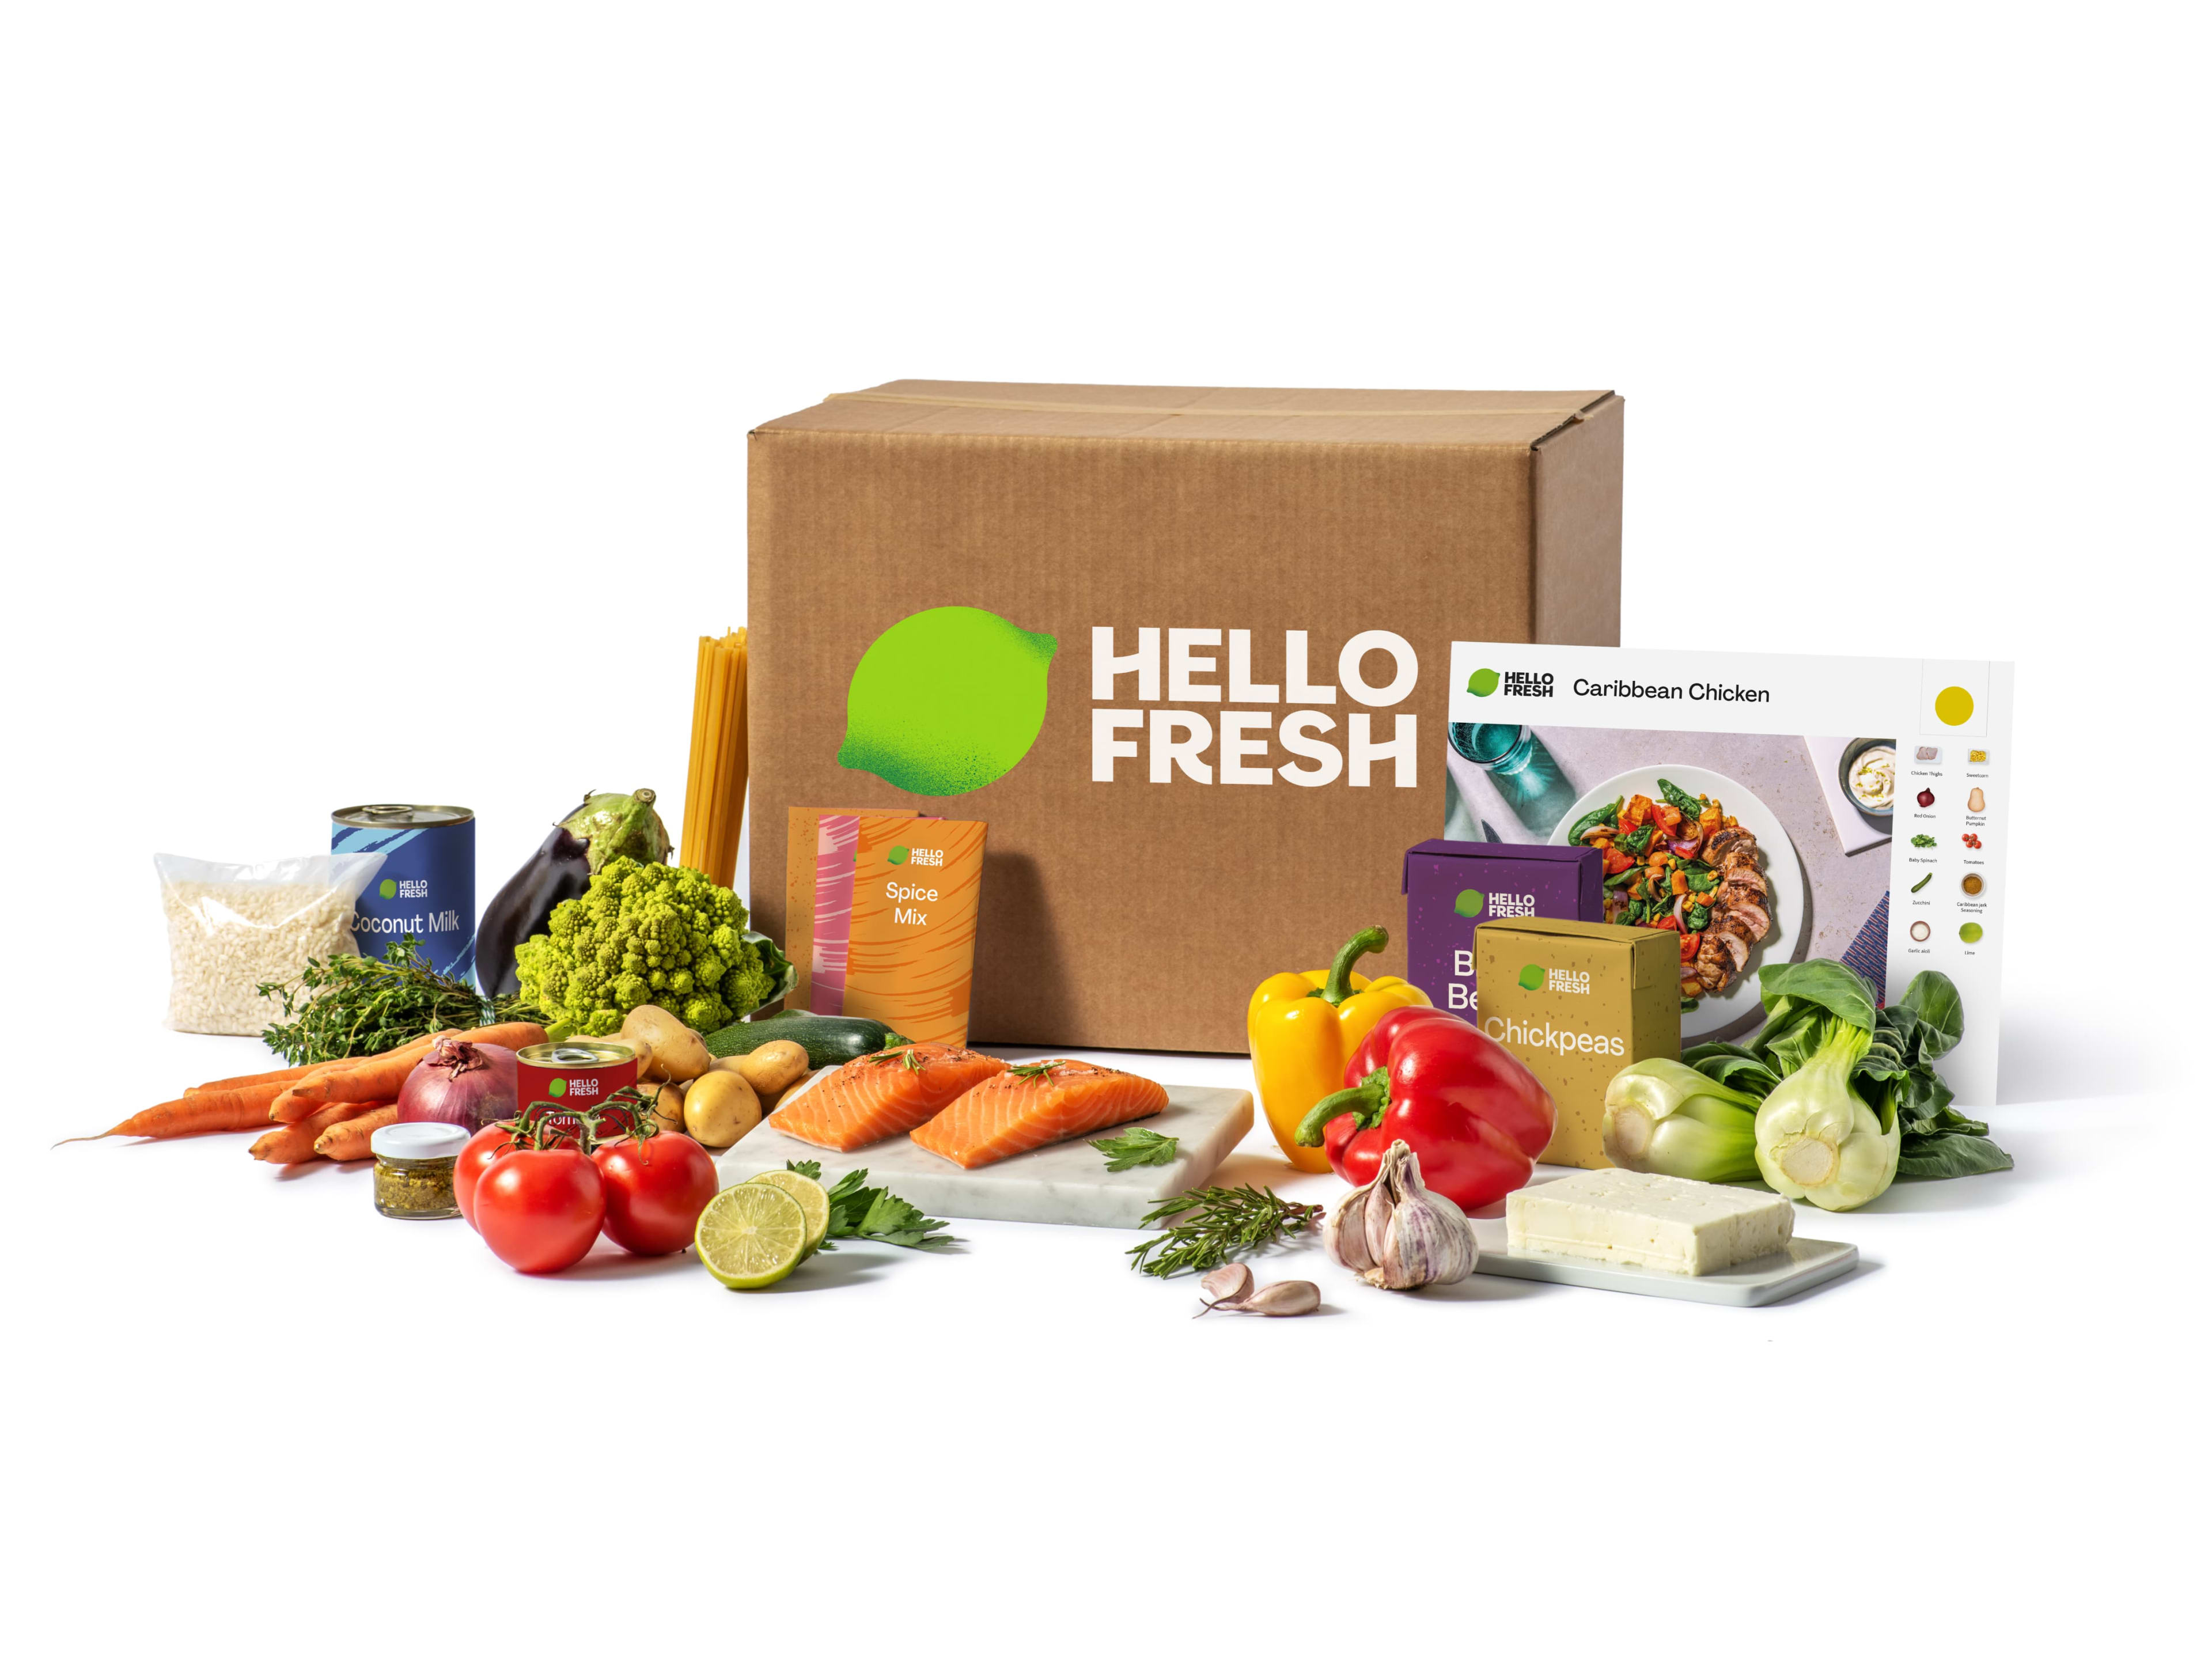 Are you new and curious to know how to cancel a HelloFresh subscription? We've got you covered.